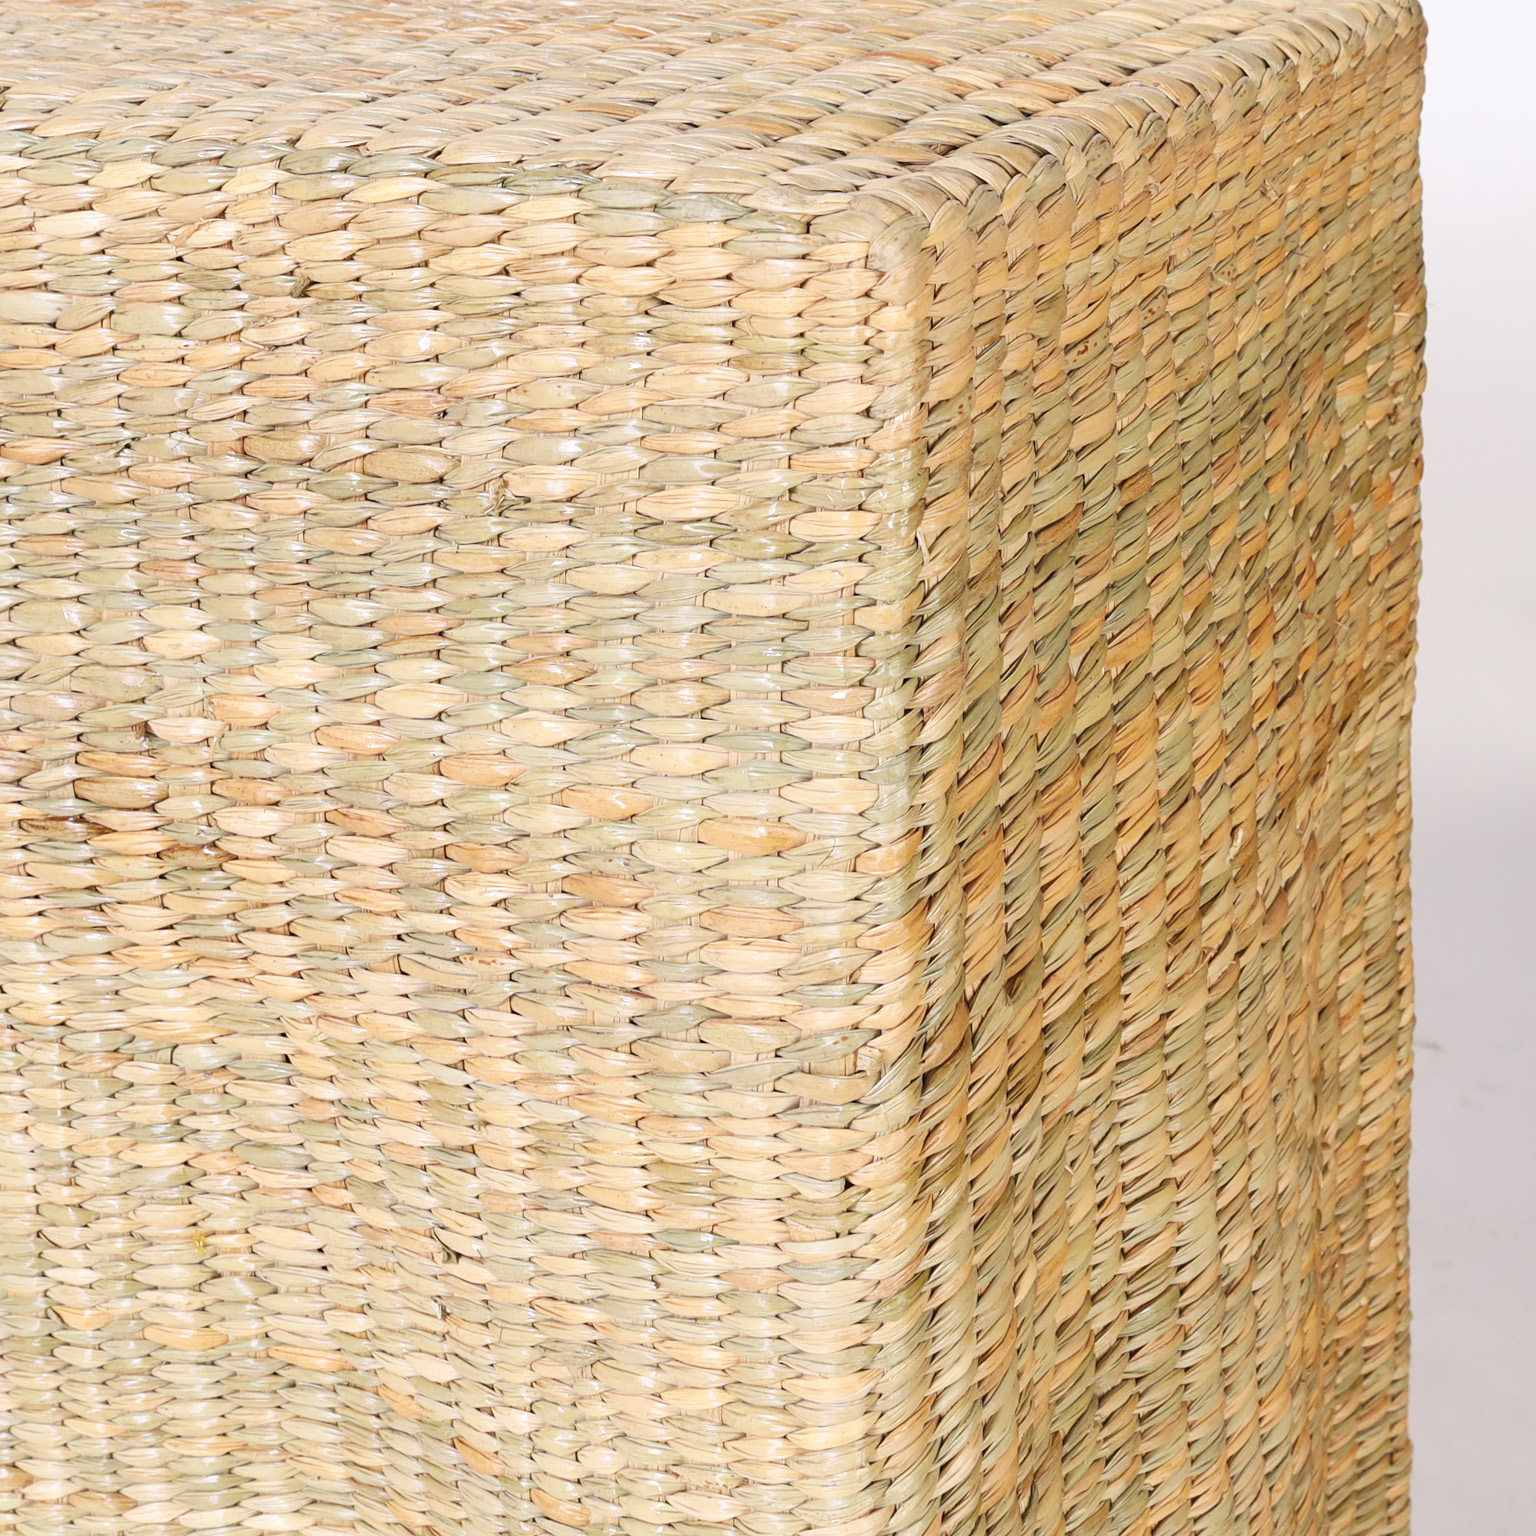 The Bali Long Woven Reed Ghost Drapery Console with Flat Back from the FS Flores Collection